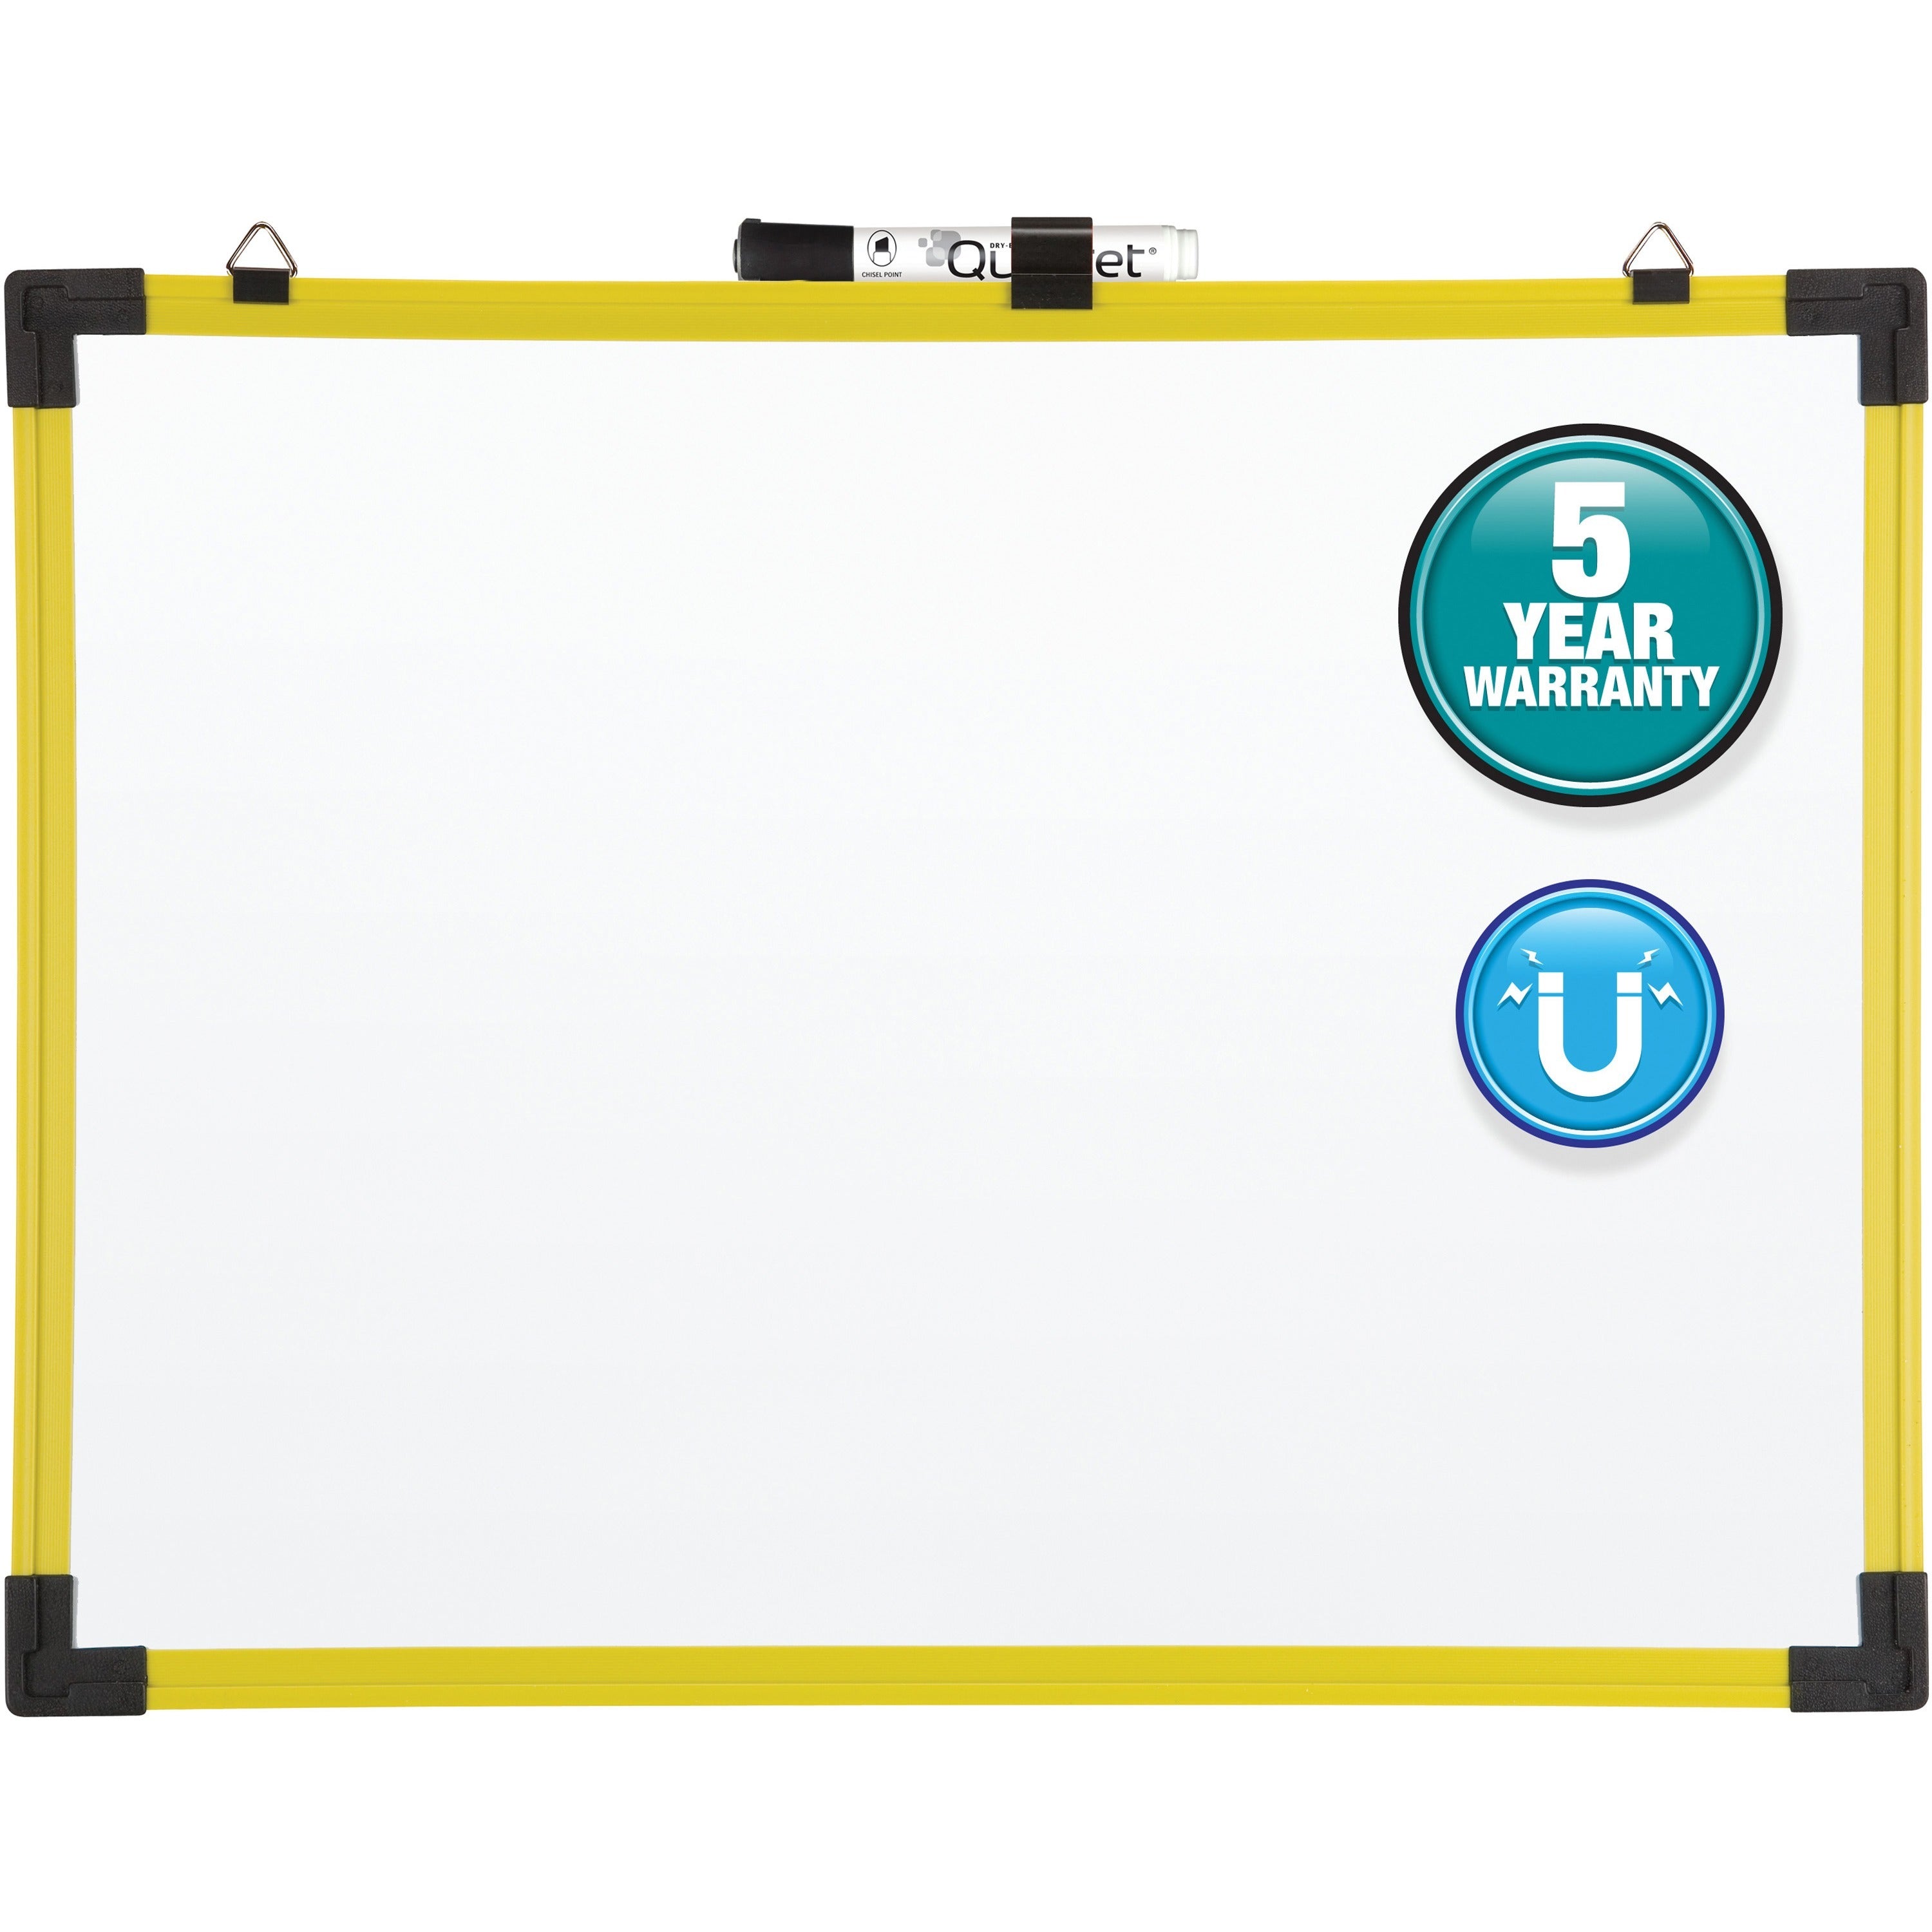 quartet-industrial-magnetic-whiteboard-48-4-ft-width-x-36-3-ft-height-white-painted-steel-surface-bright-yellow-aluminum-frame-rectangle-horizontal-magnetic-1-each_qrt724126 - 1